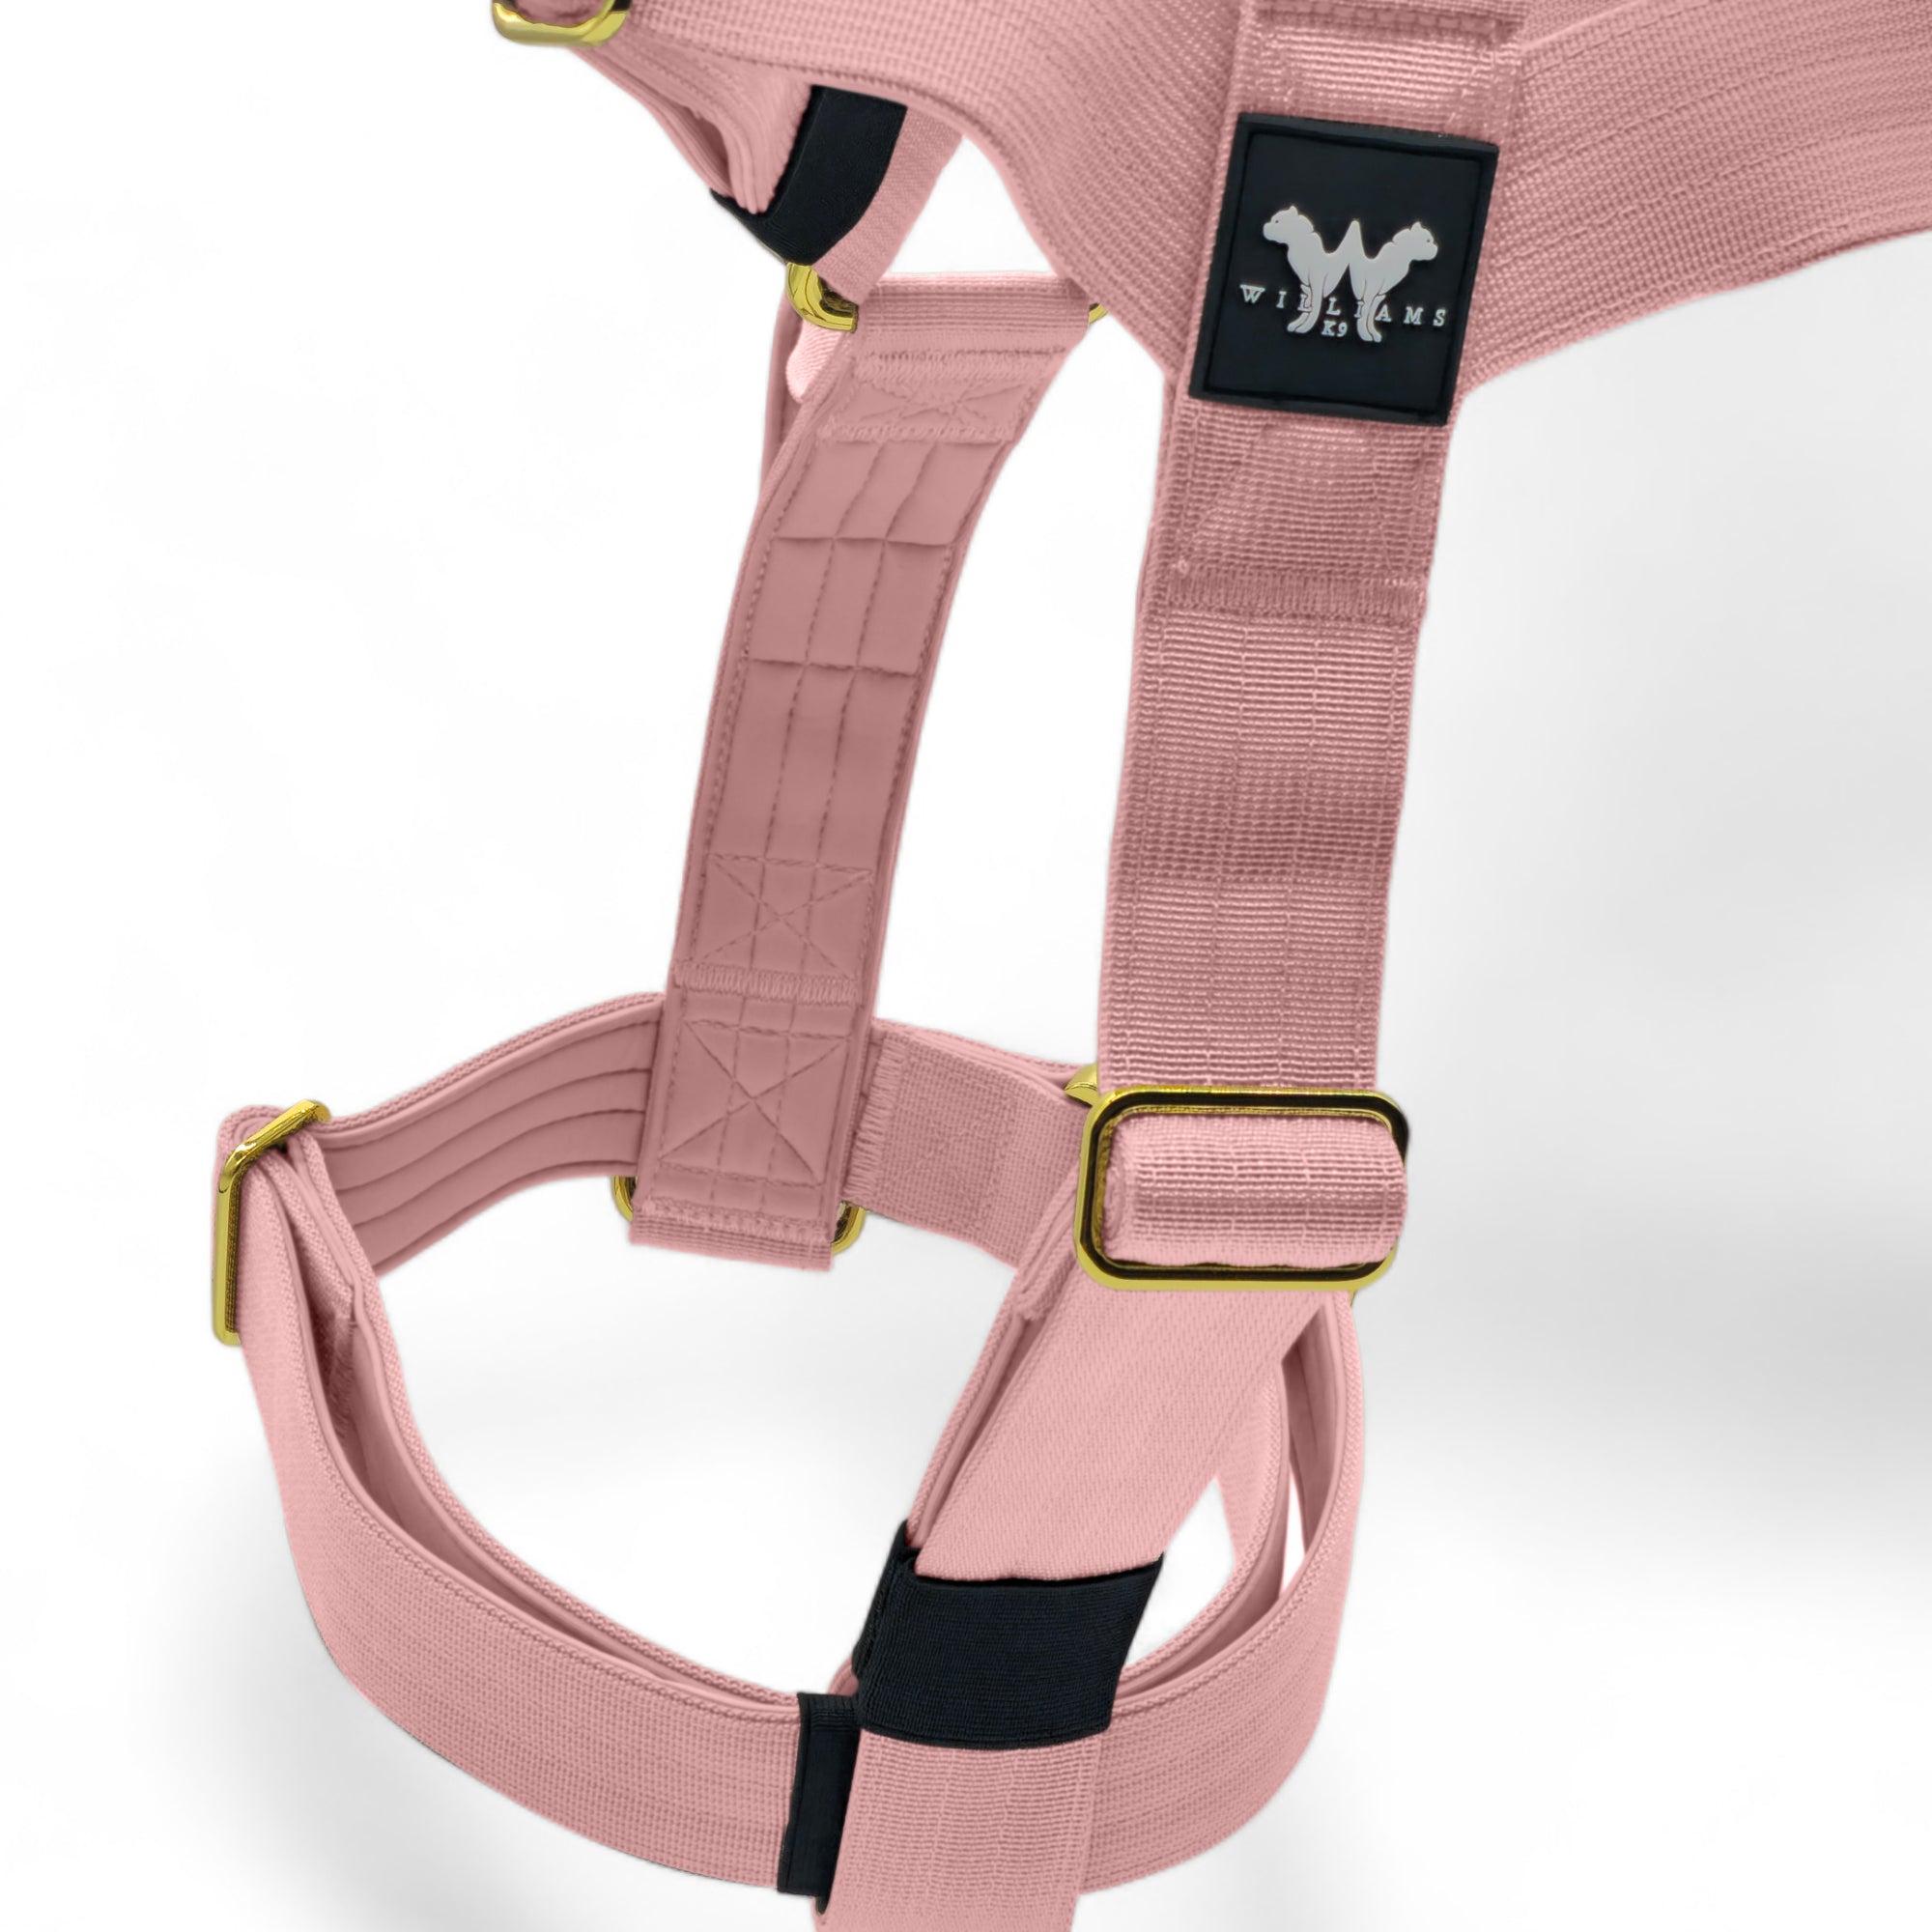 Anti-Pull Harness Soft Pink | Quad Stitched Nylon Adjustable With Control Handle